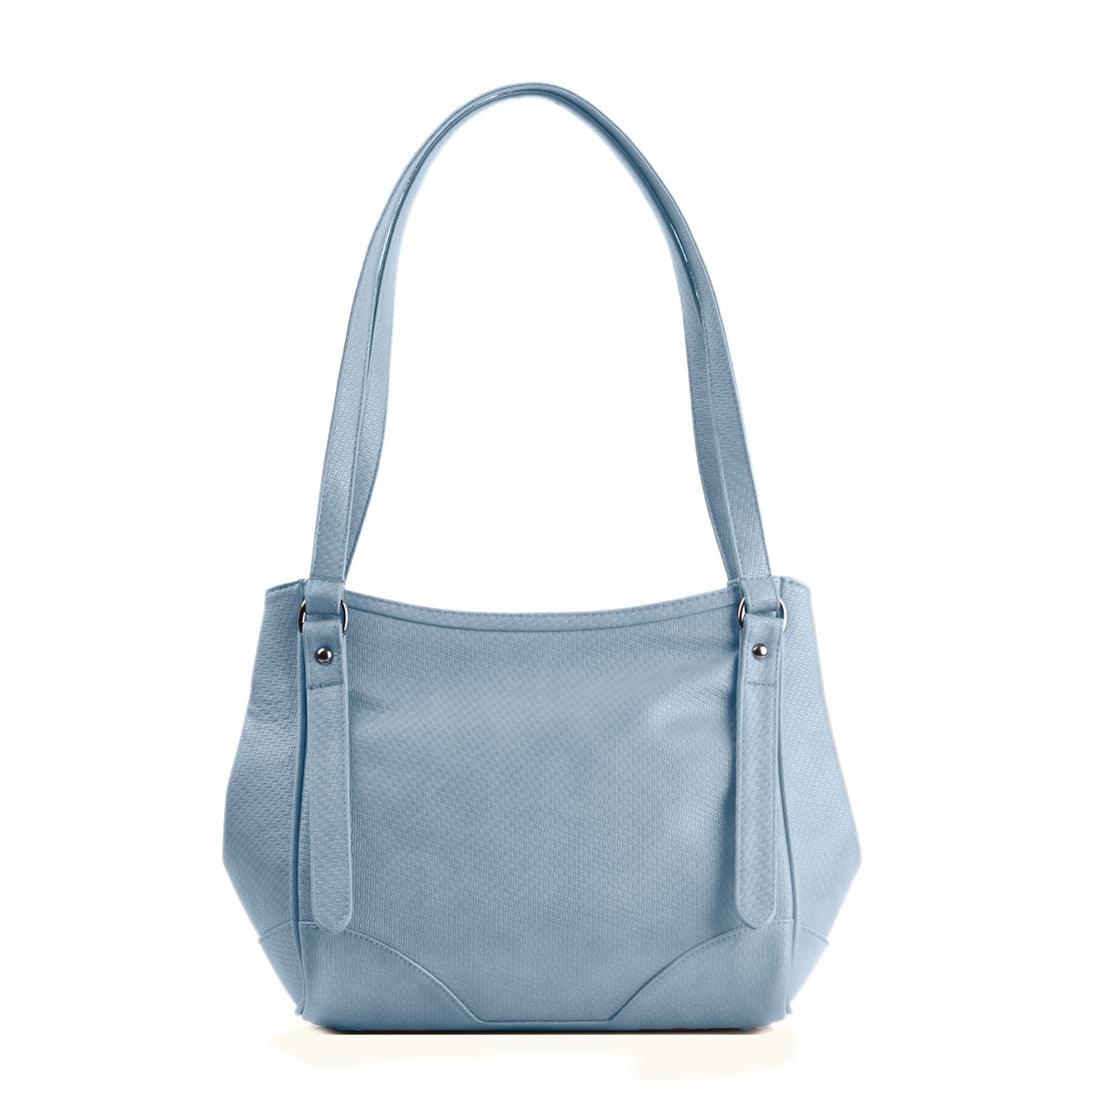 Blue Leather Tote Bag Floral Blue - CANVAEGYPT